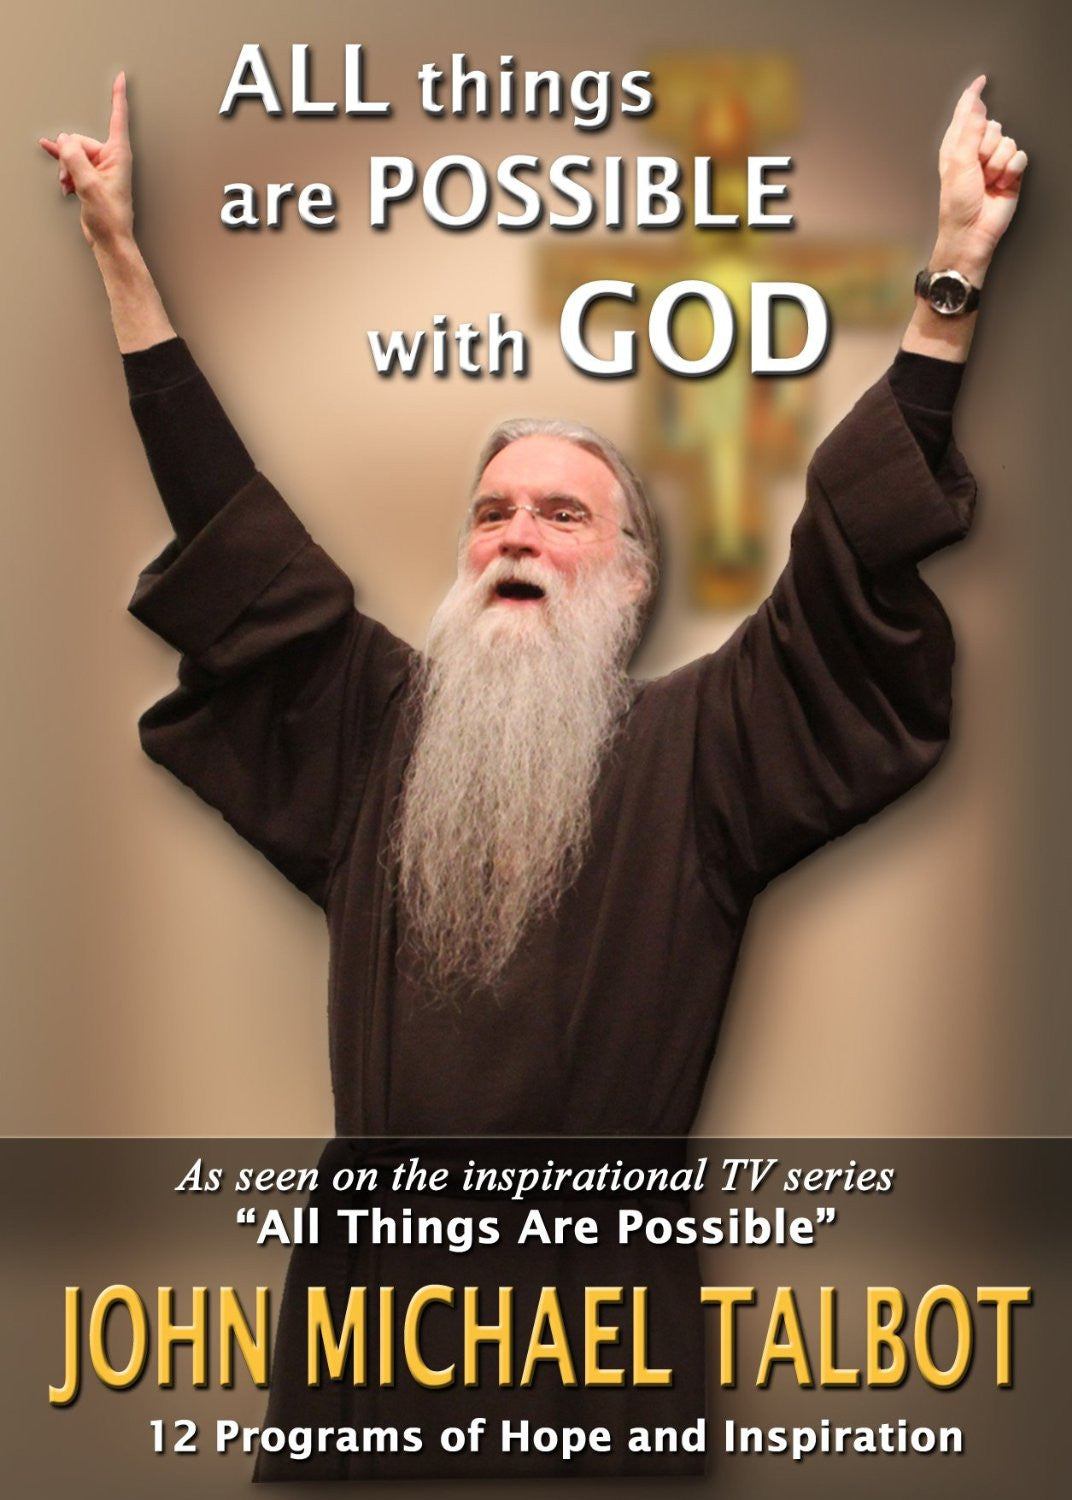 All things are possible with God DVD set